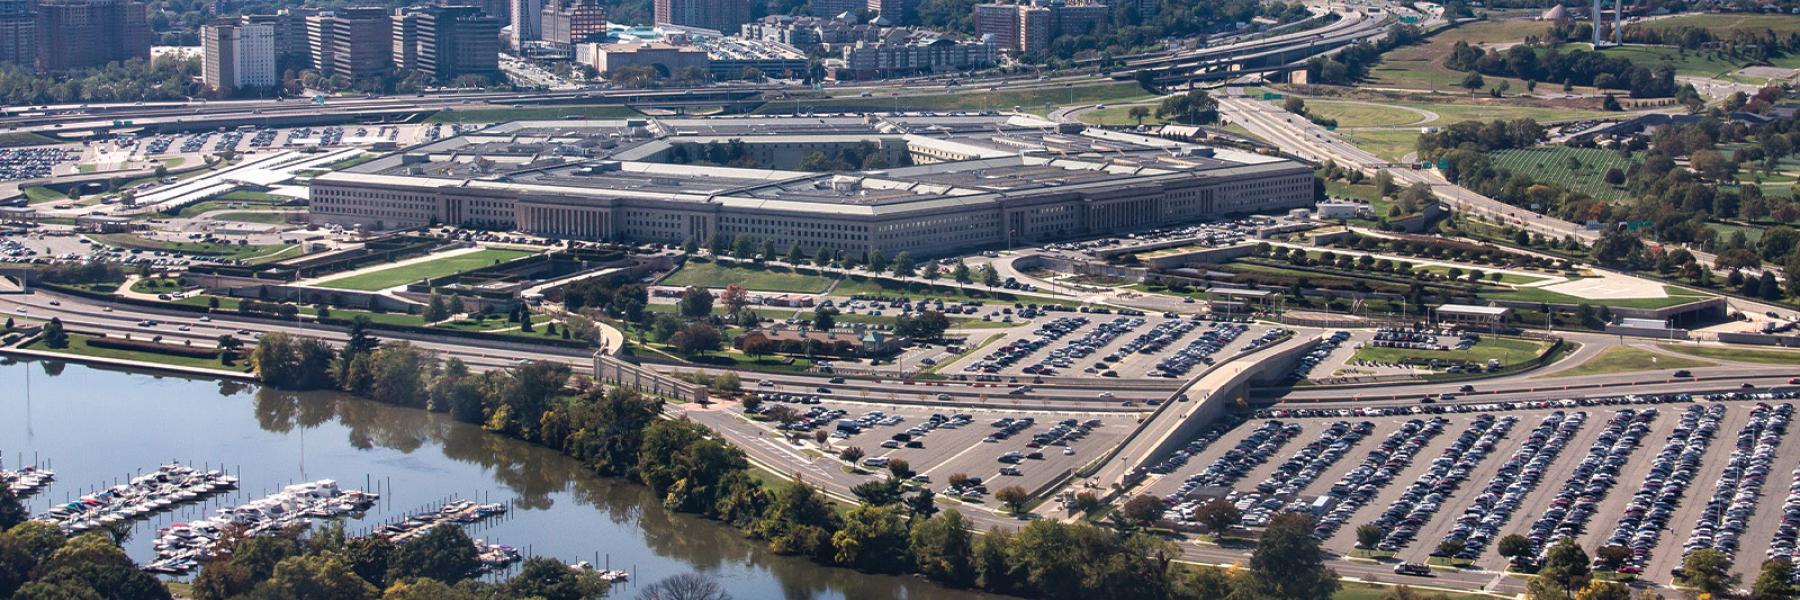 Aerial view of the Pentagon in Washington DC